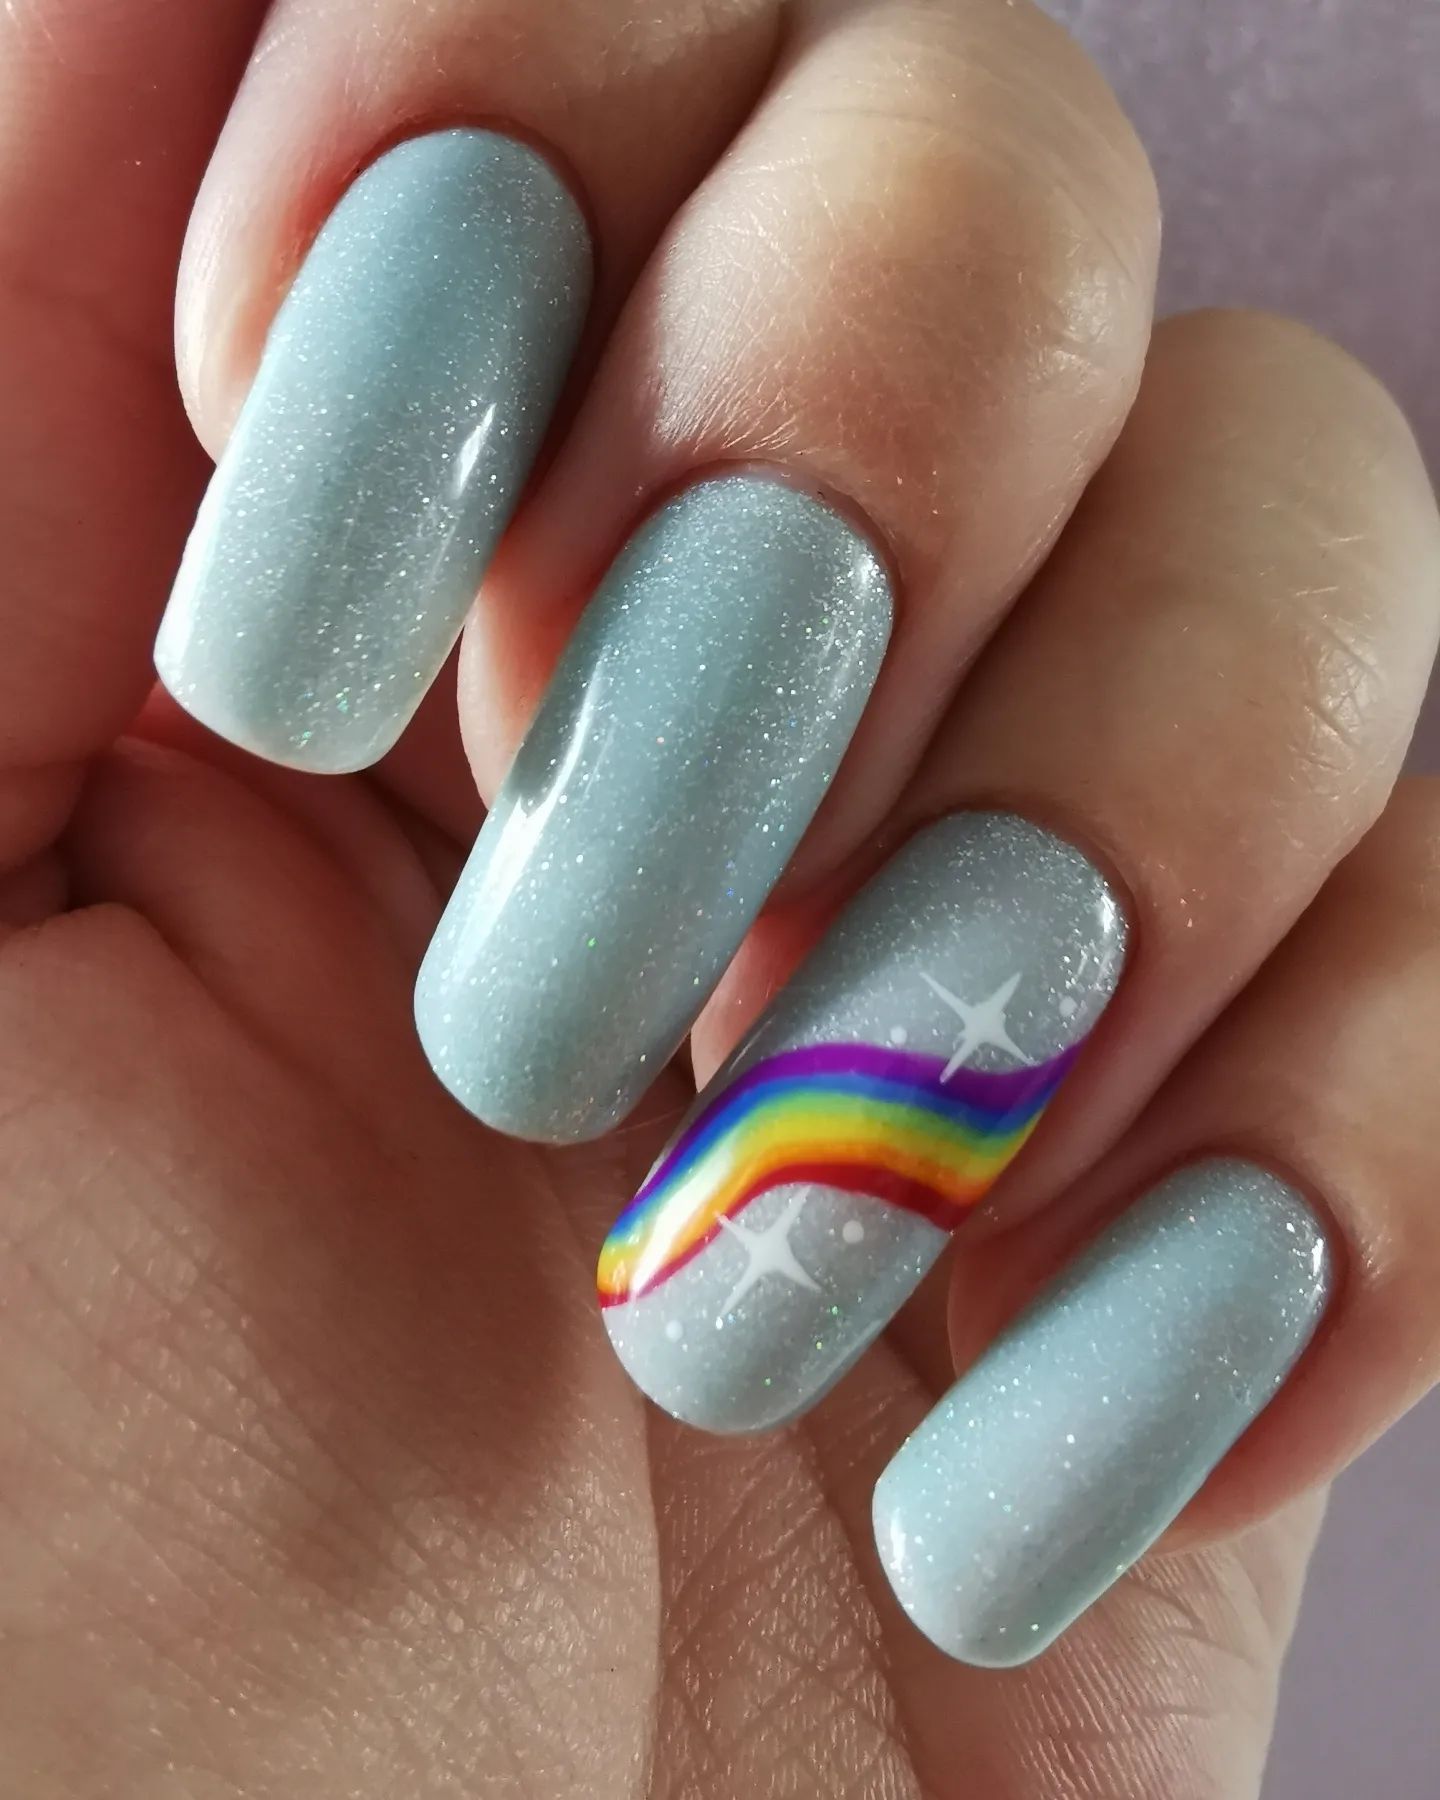 The beauty after the storm: Rainbow! It is full of color and it represents a sign of hope. You should go for it with your light blue nails. 